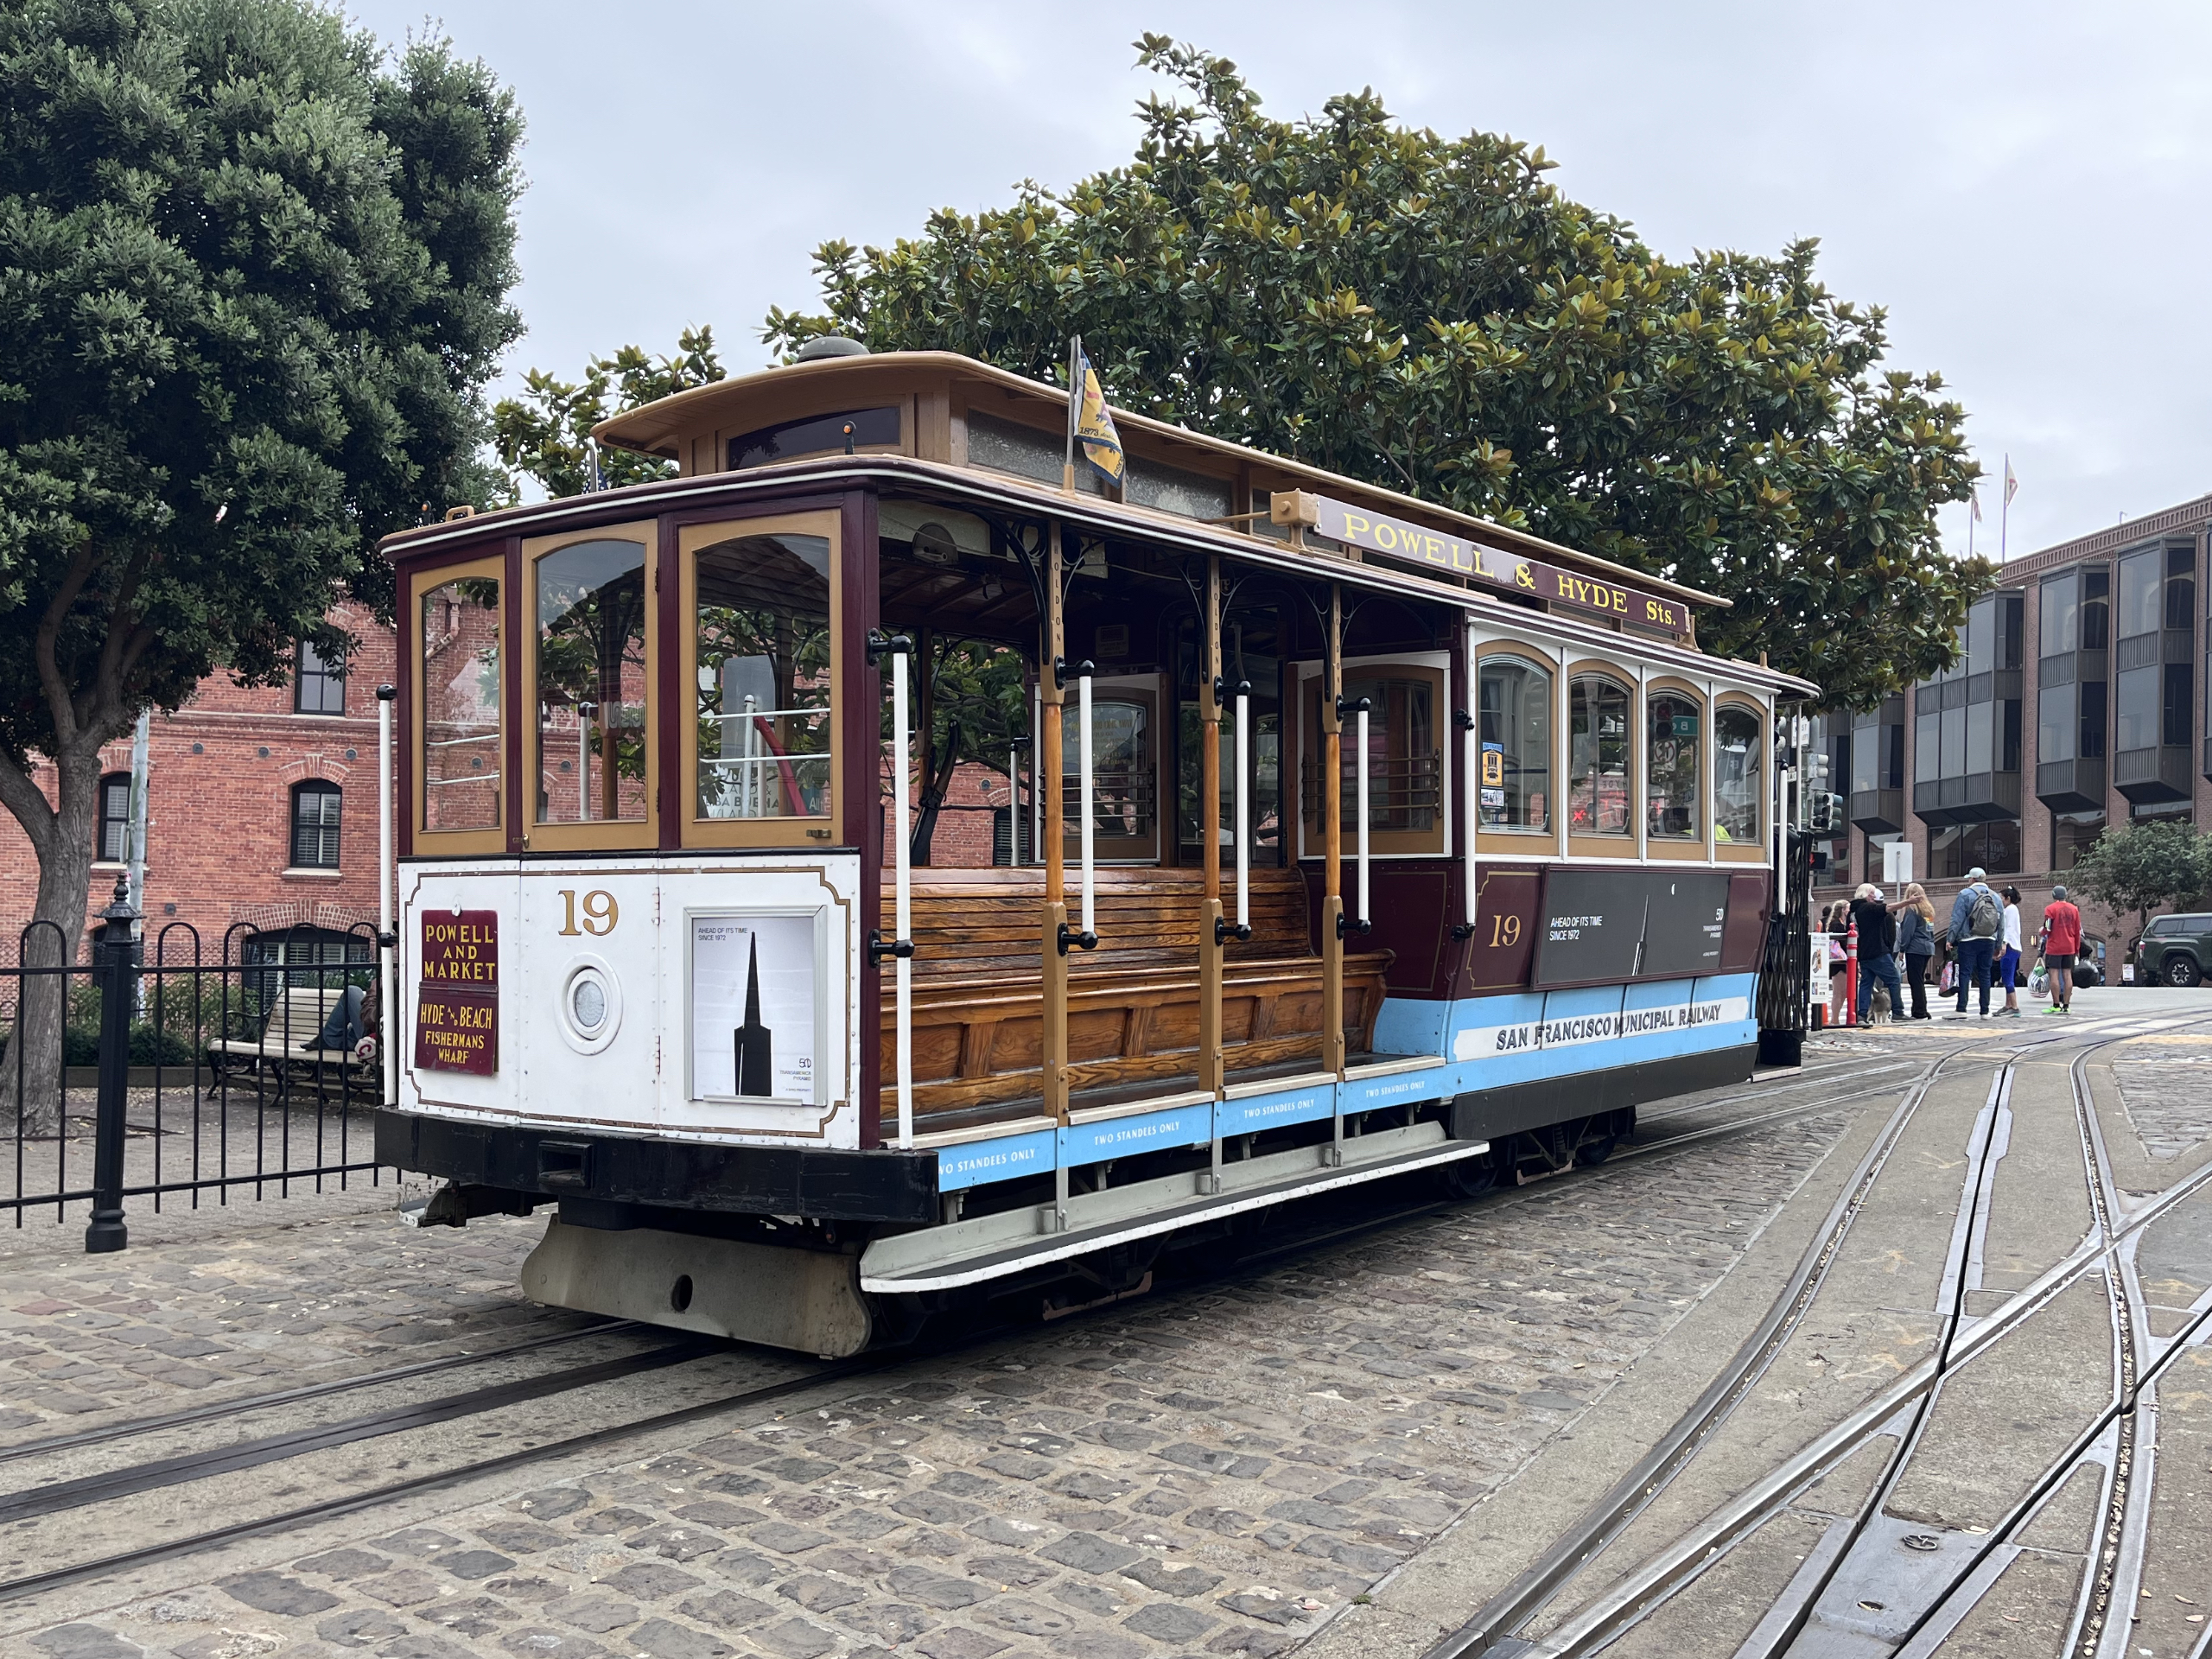 Cable car no. 19 sliding into the turnaround at the base of Russian Hill